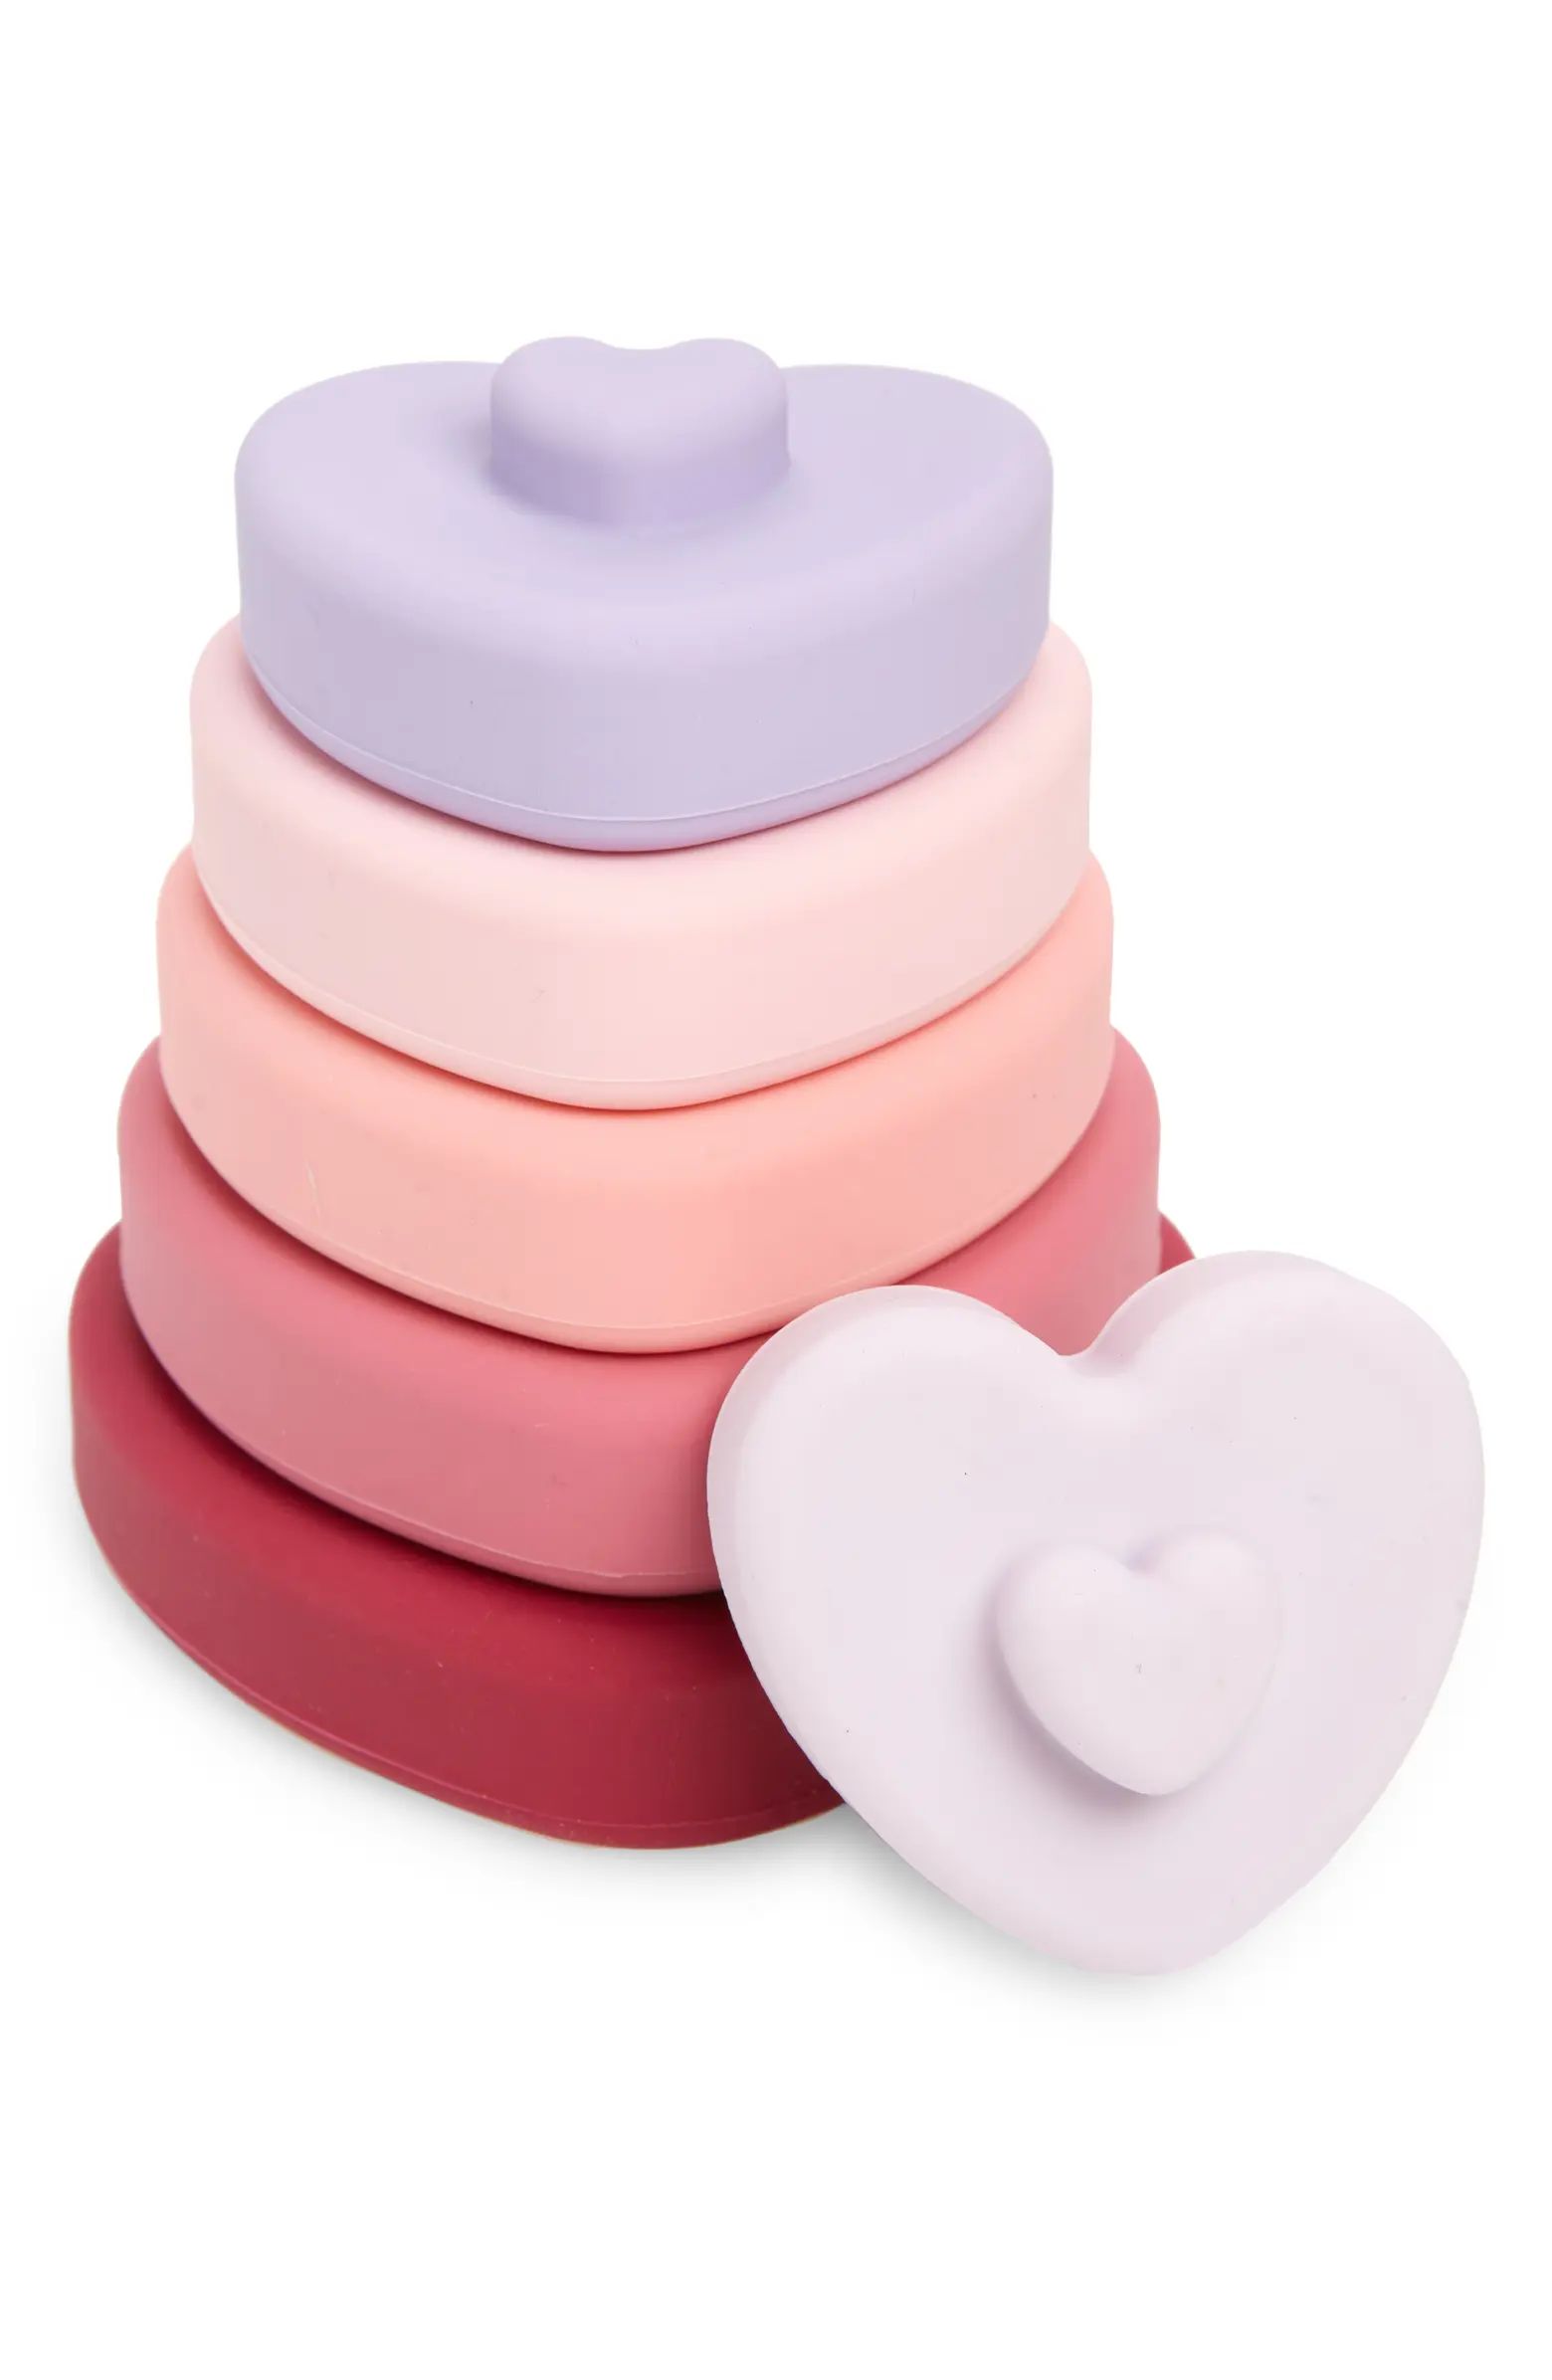 Three Hearts Heart Silicone Stacker Toy | Nordstrom | Nordstrom